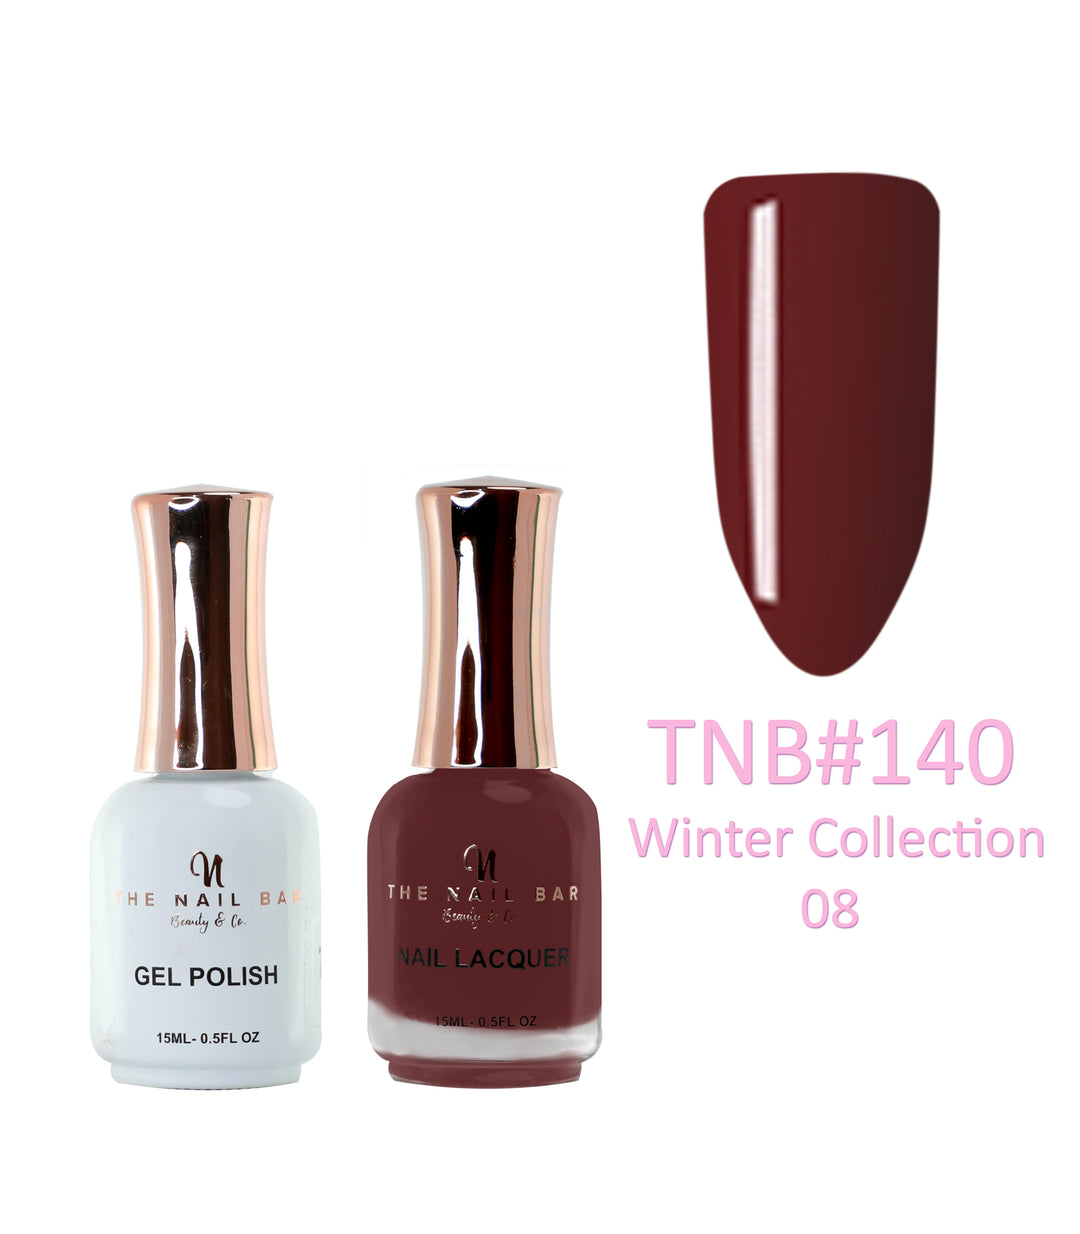 Dual Polish/Gel colour matching (15ml) - Winter Collection 08